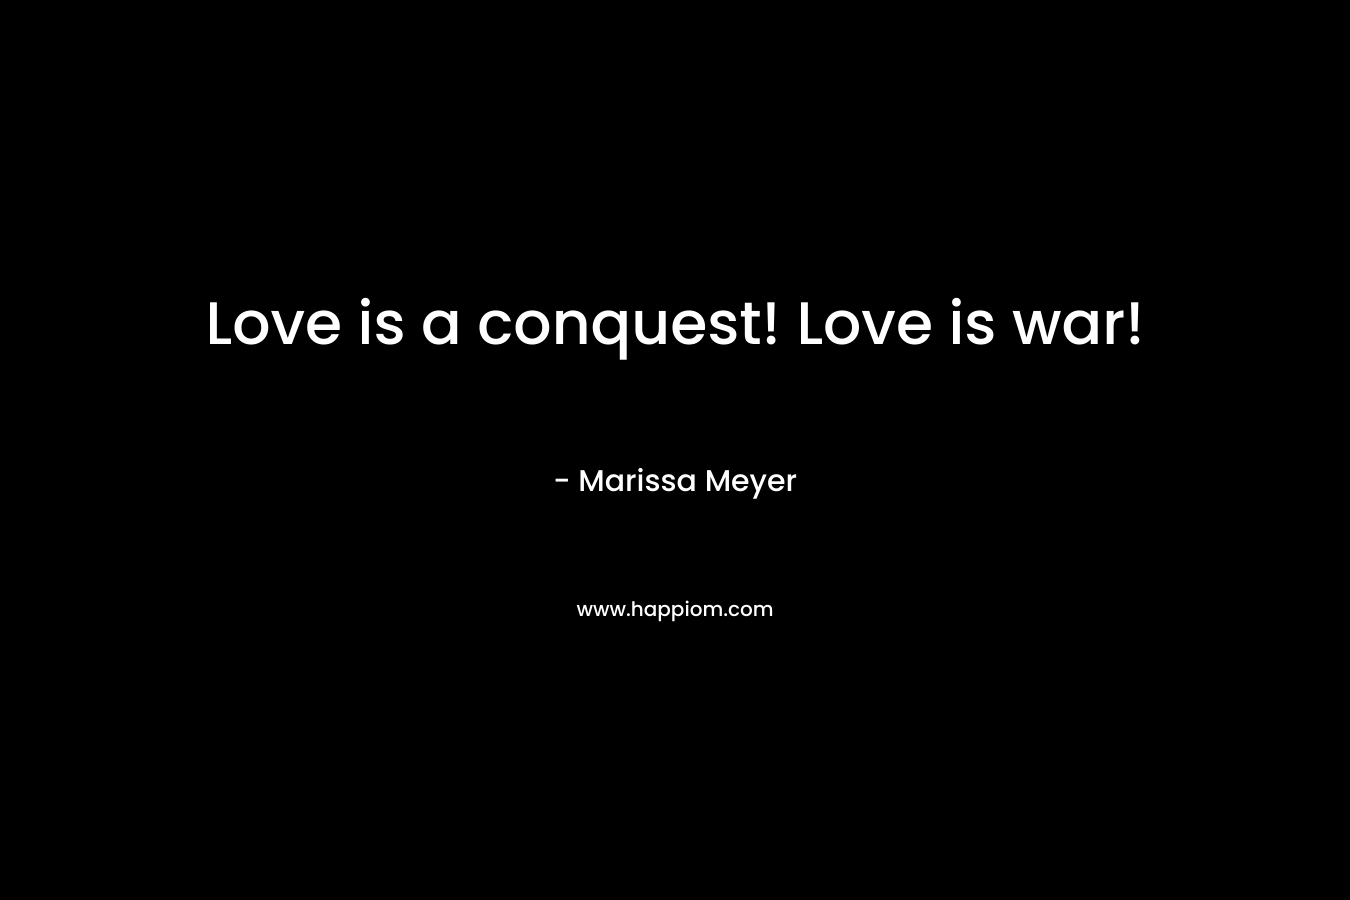 Love is a conquest! Love is war!